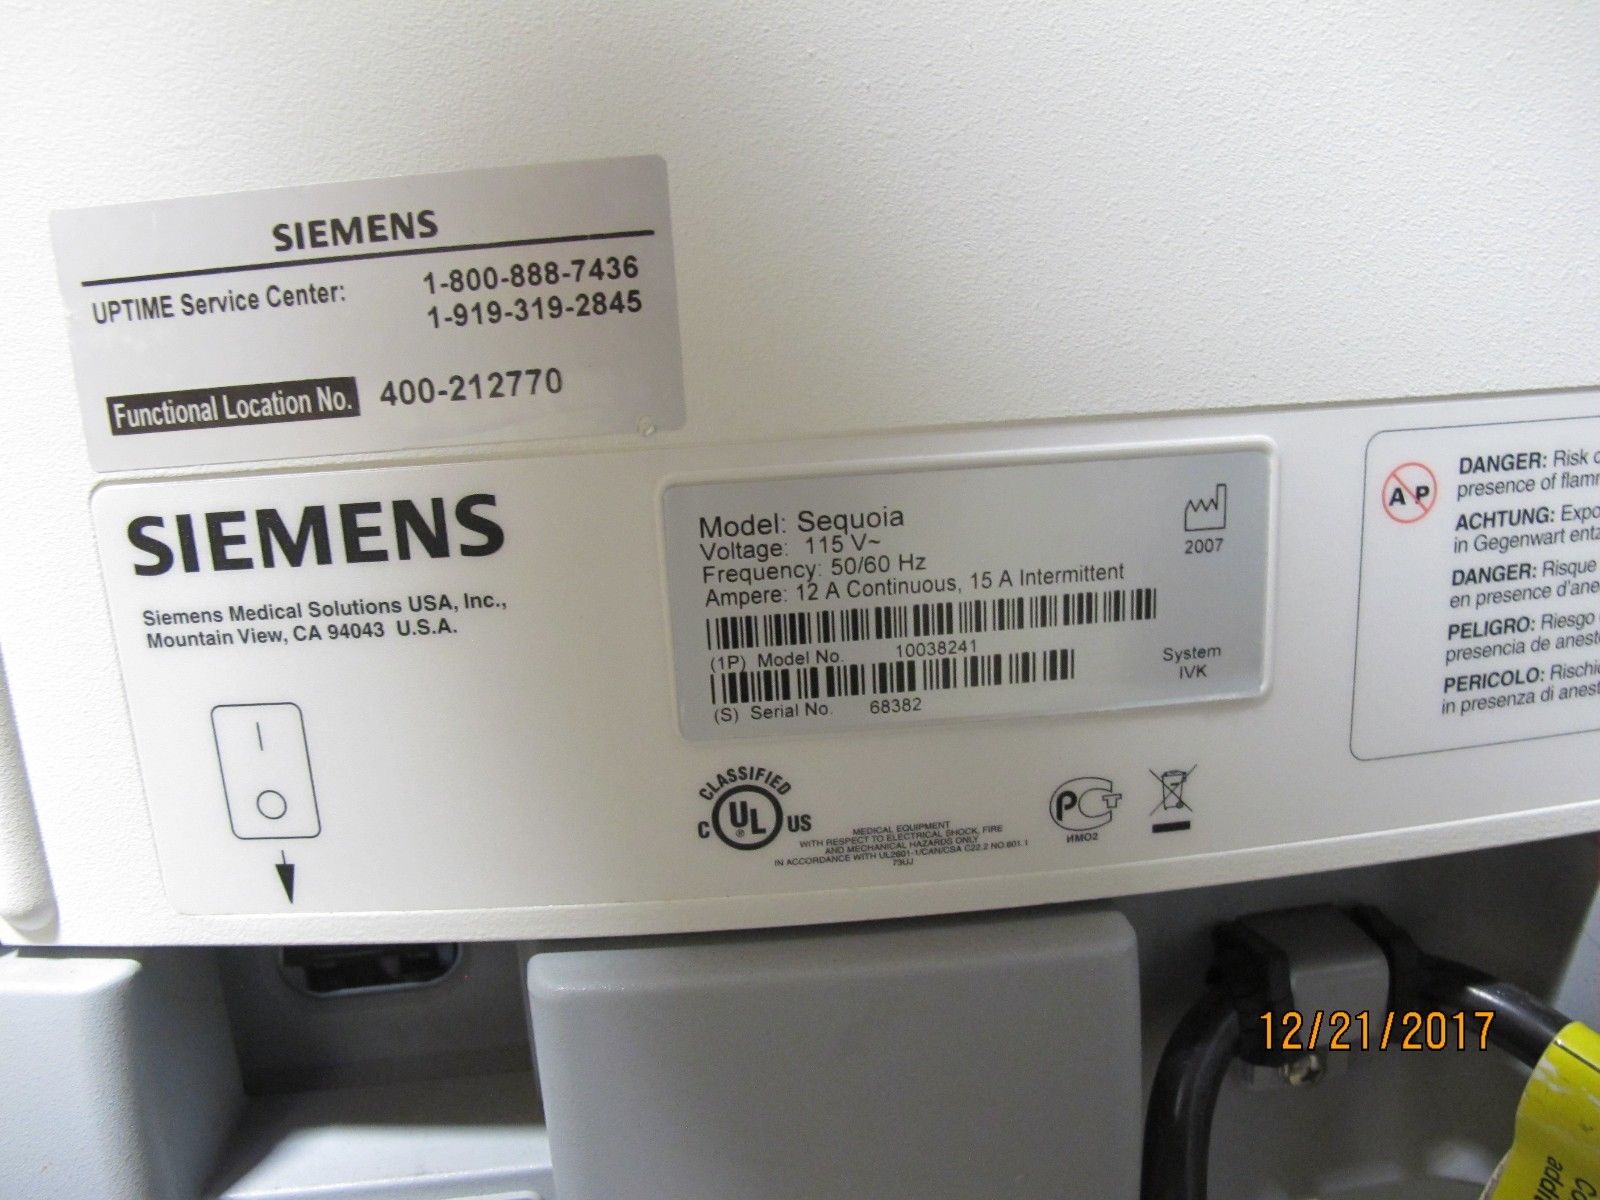 Siemens Acuson Sequoia 512 Portable Ultrasound LCD great shape 10038241 #1 DIAGNOSTIC ULTRASOUND MACHINES FOR SALE